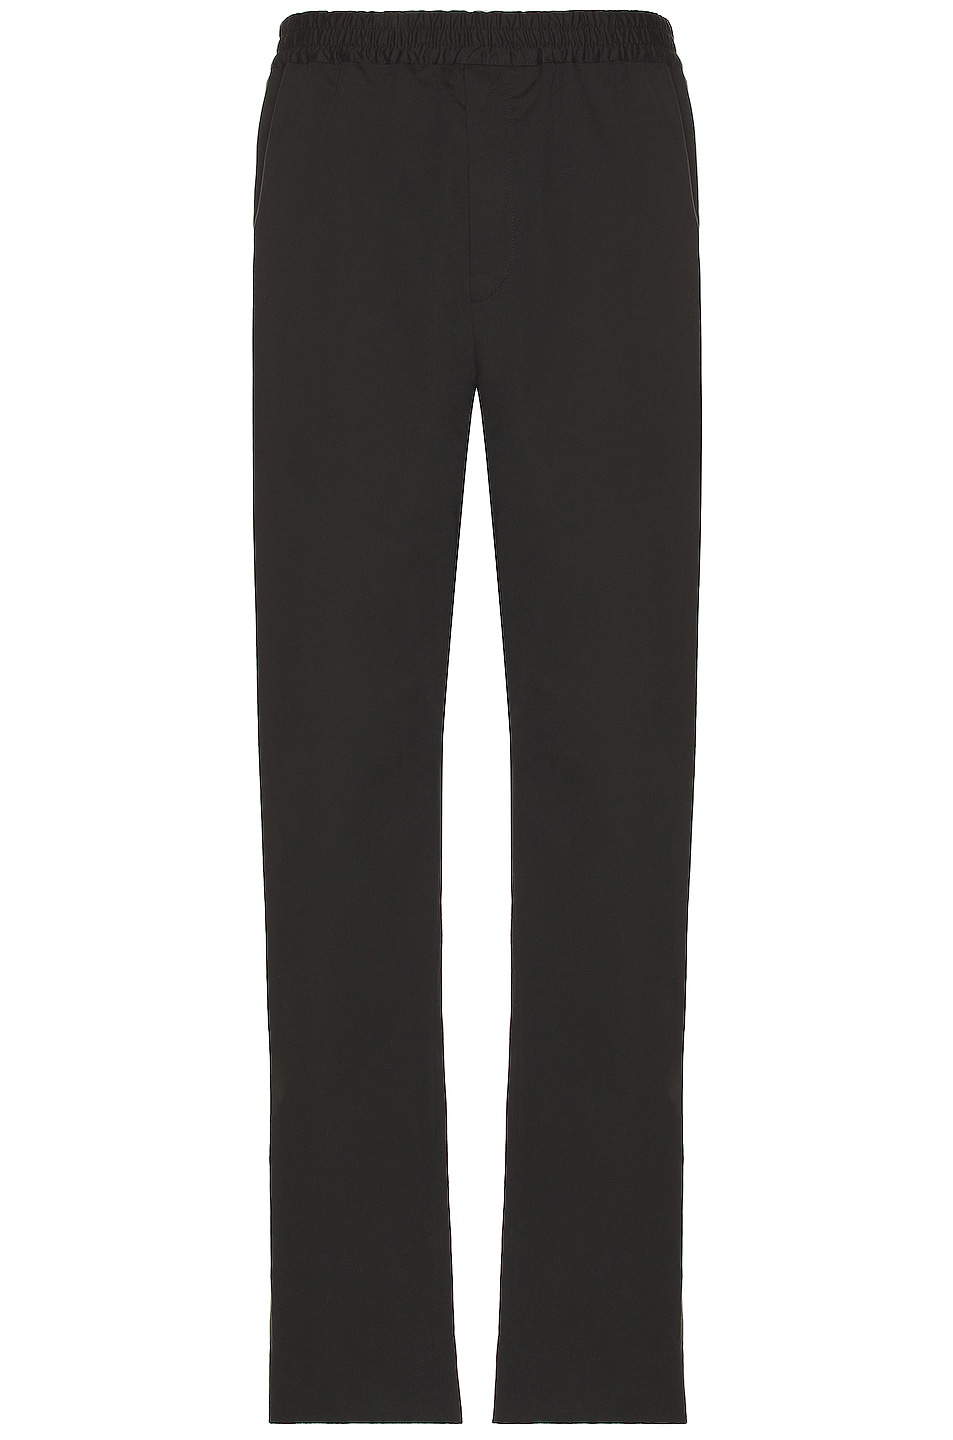 Image 1 of The Row Jonah Pants in Black